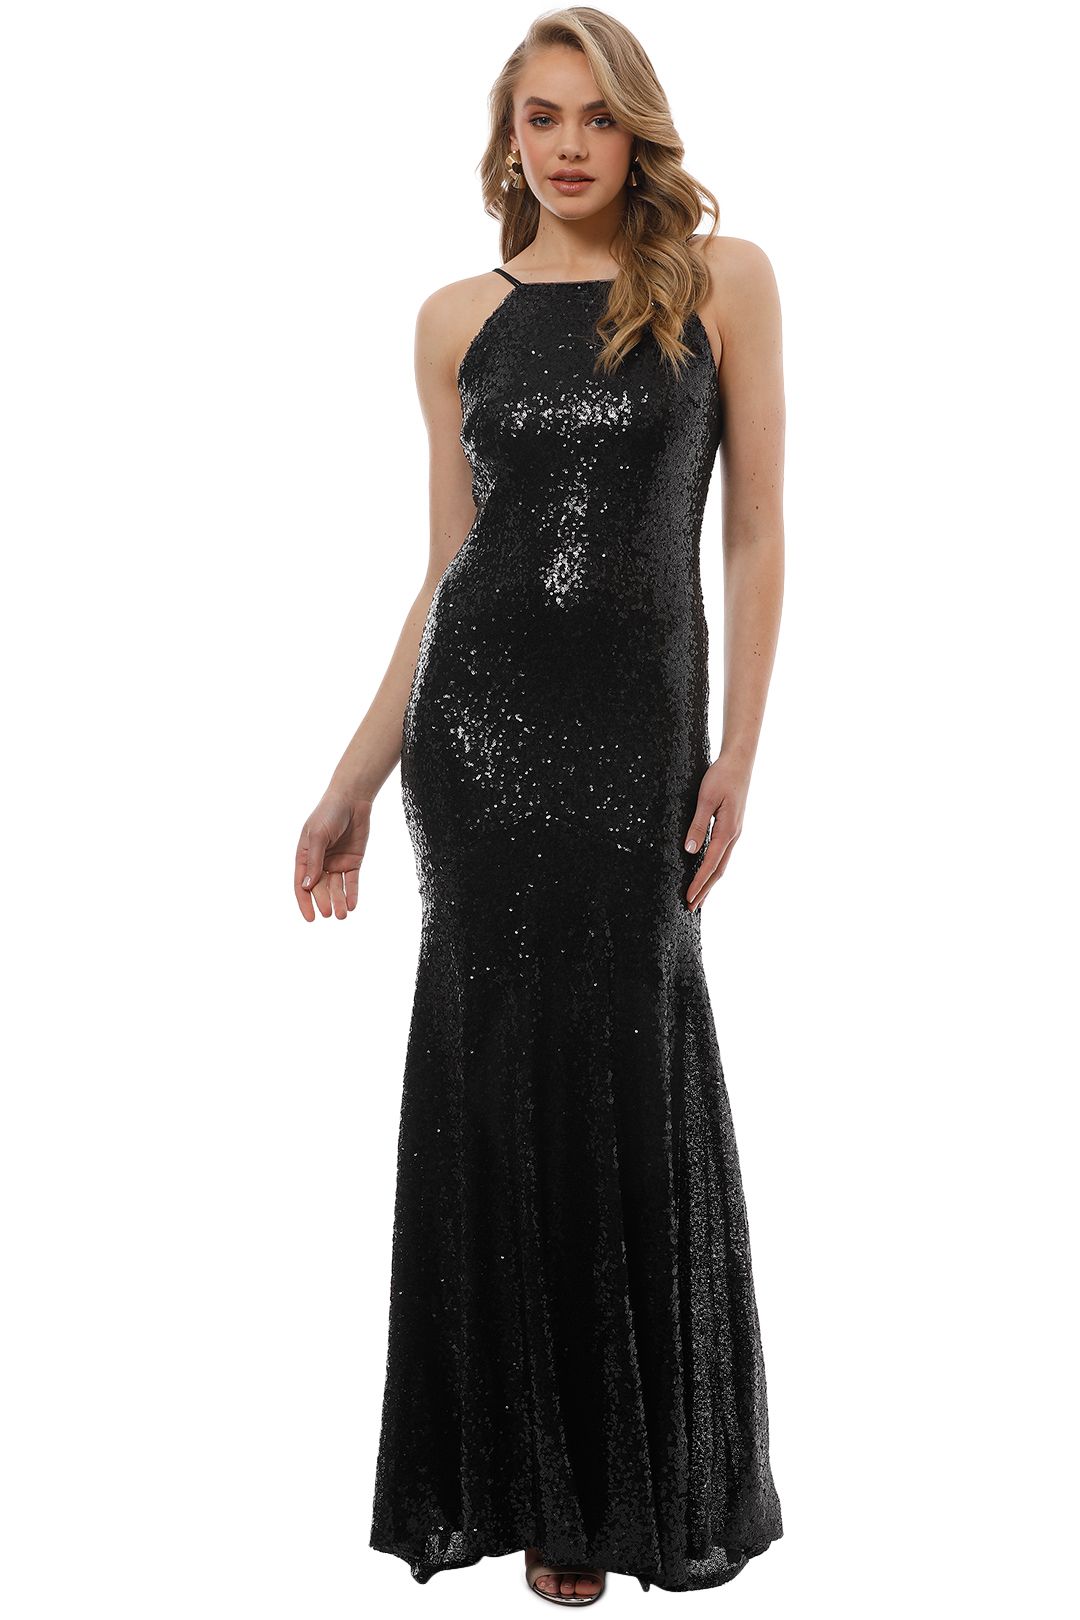 Theia - Jessica Gown - Black - Front